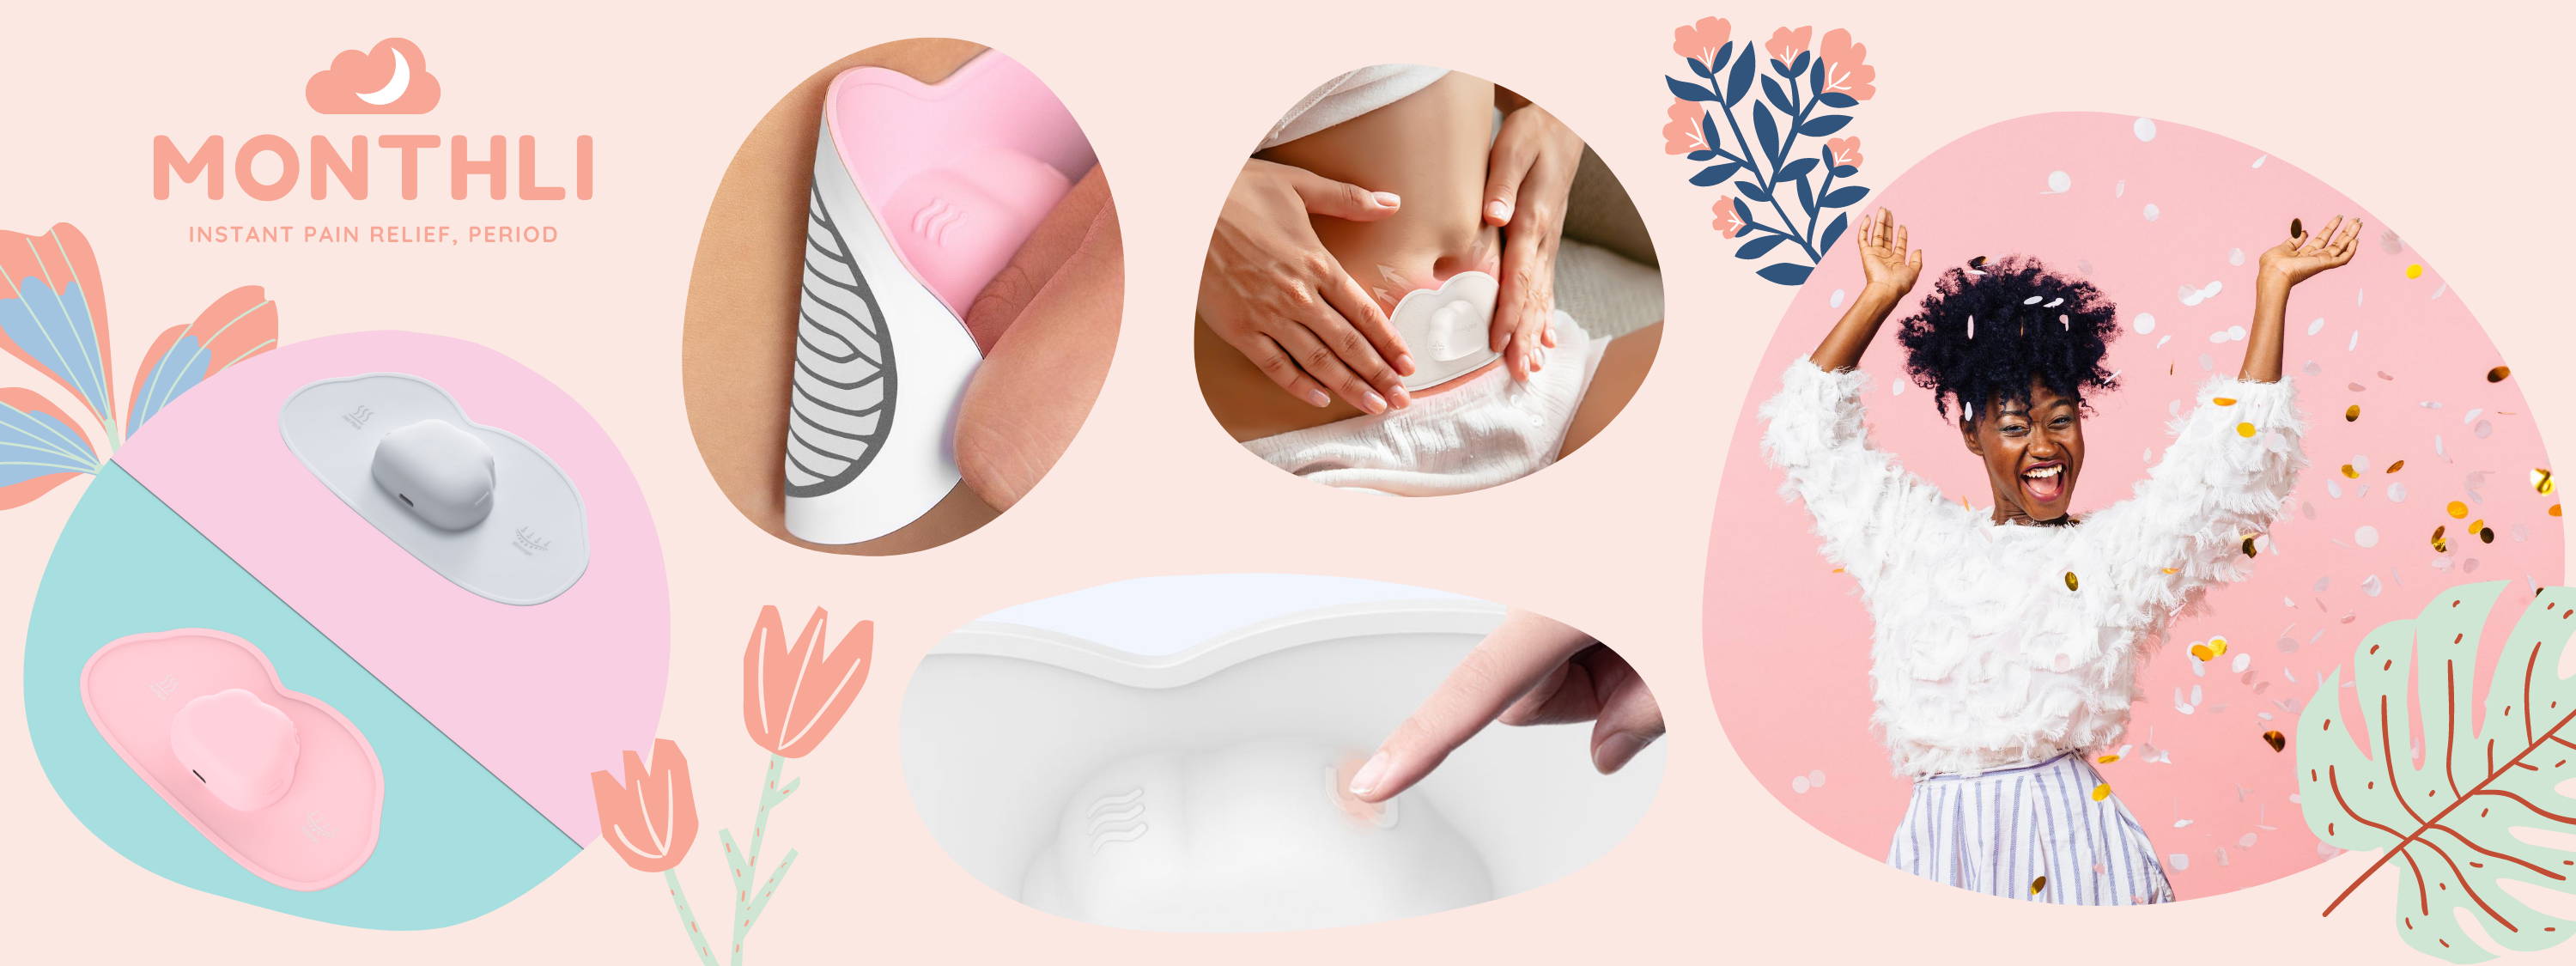 monthli menstruation pain relief, reusable gel pads. period cramps relief, home remedies for menstrual cramps, natural period cramp remedies